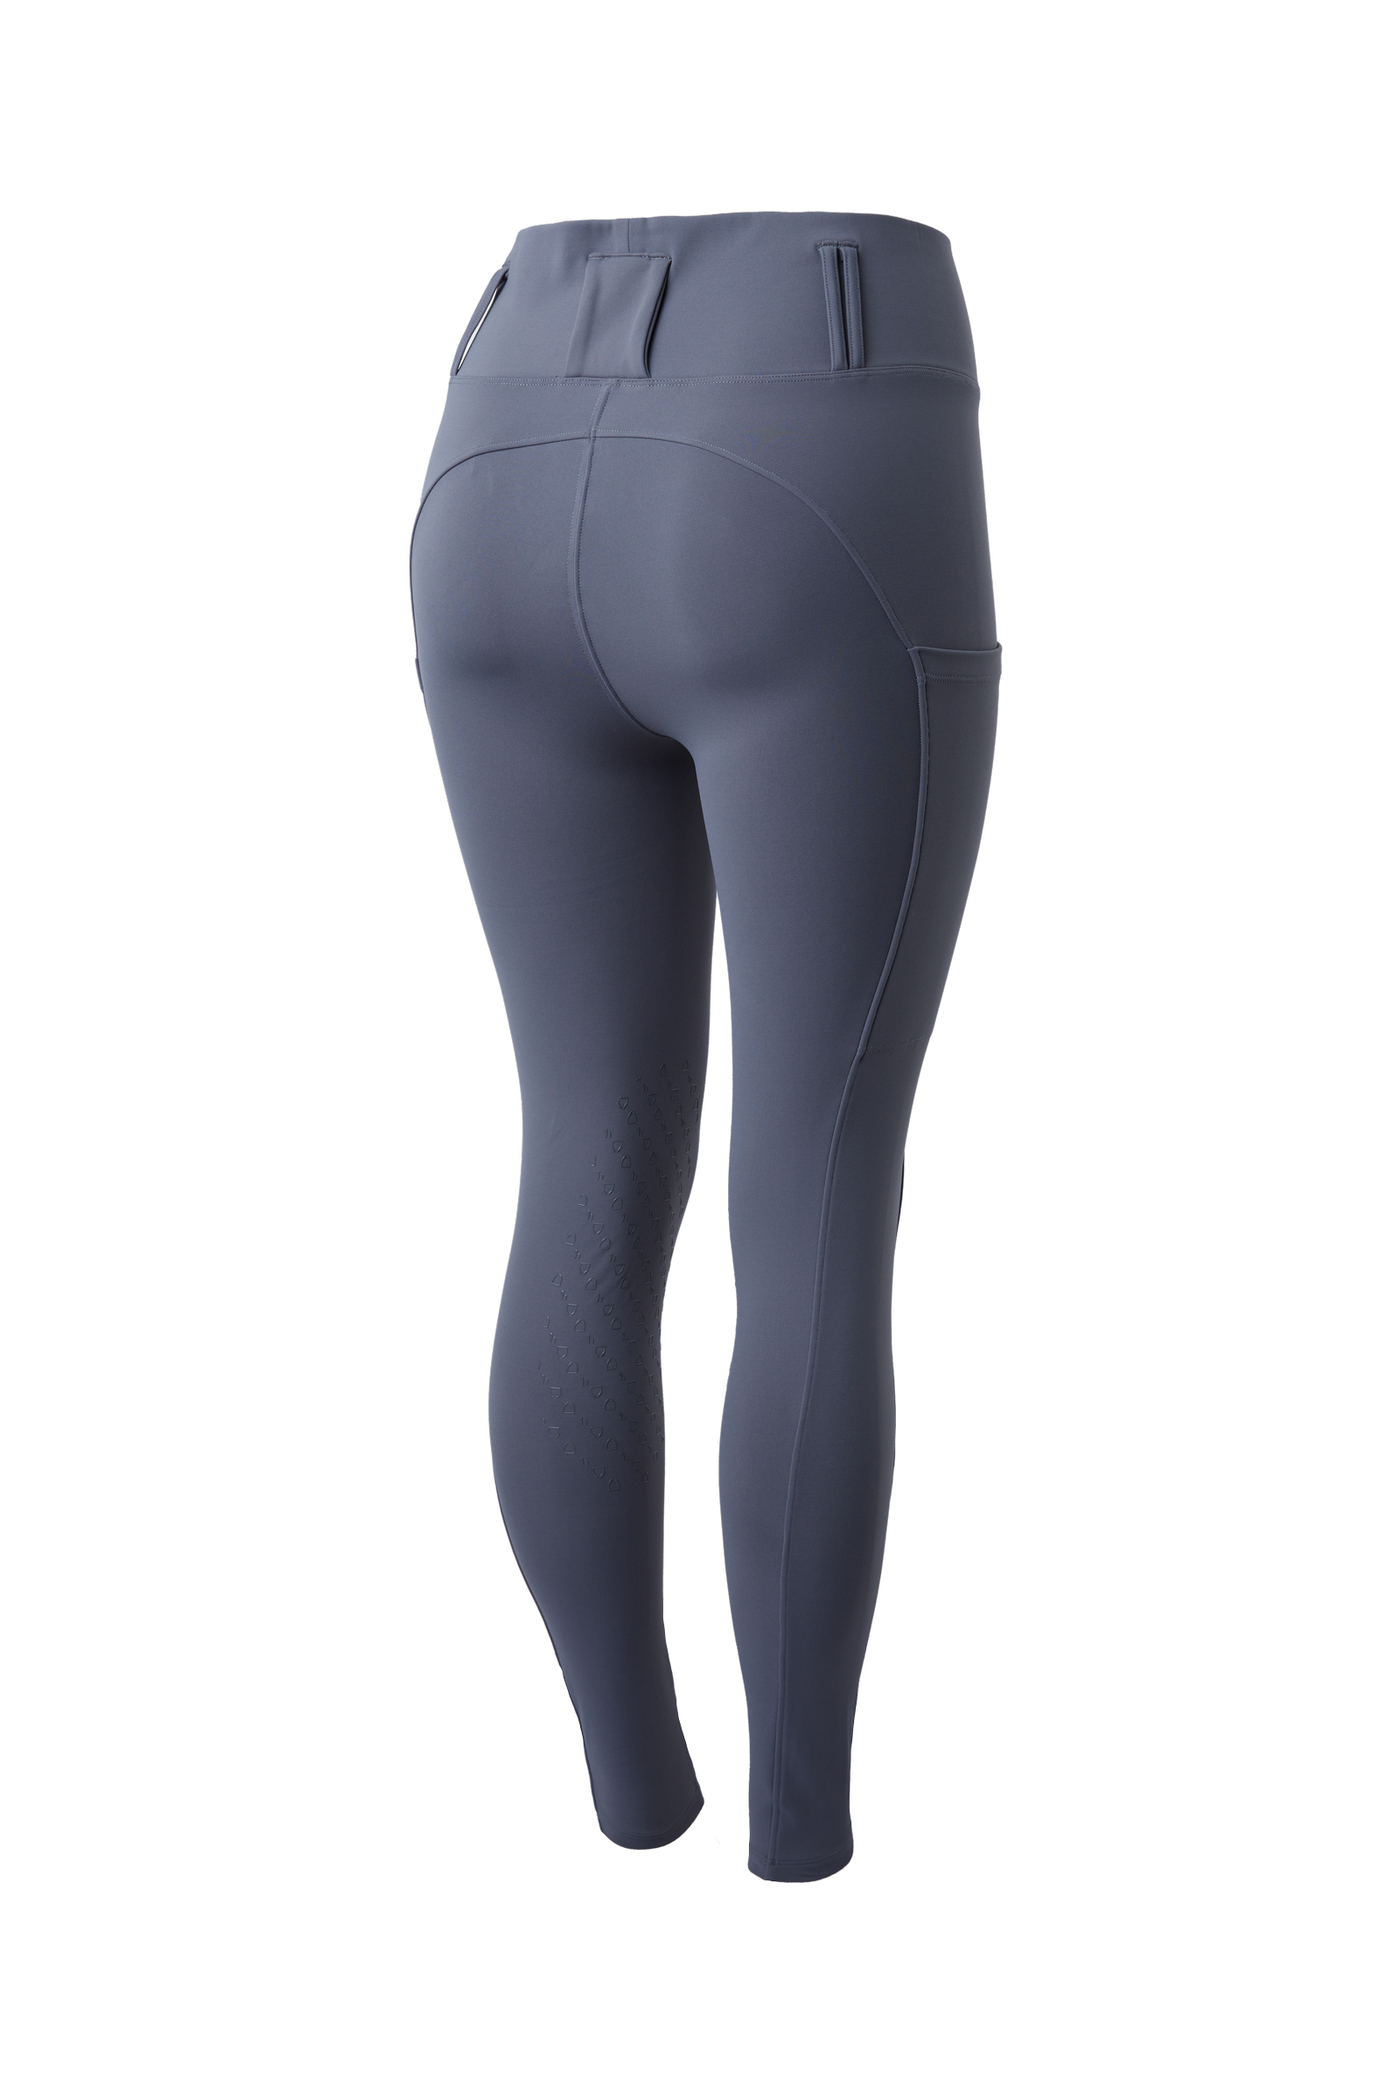 Horze Active Women's Knee Grip Winter Riding Tights with Phone Pocket